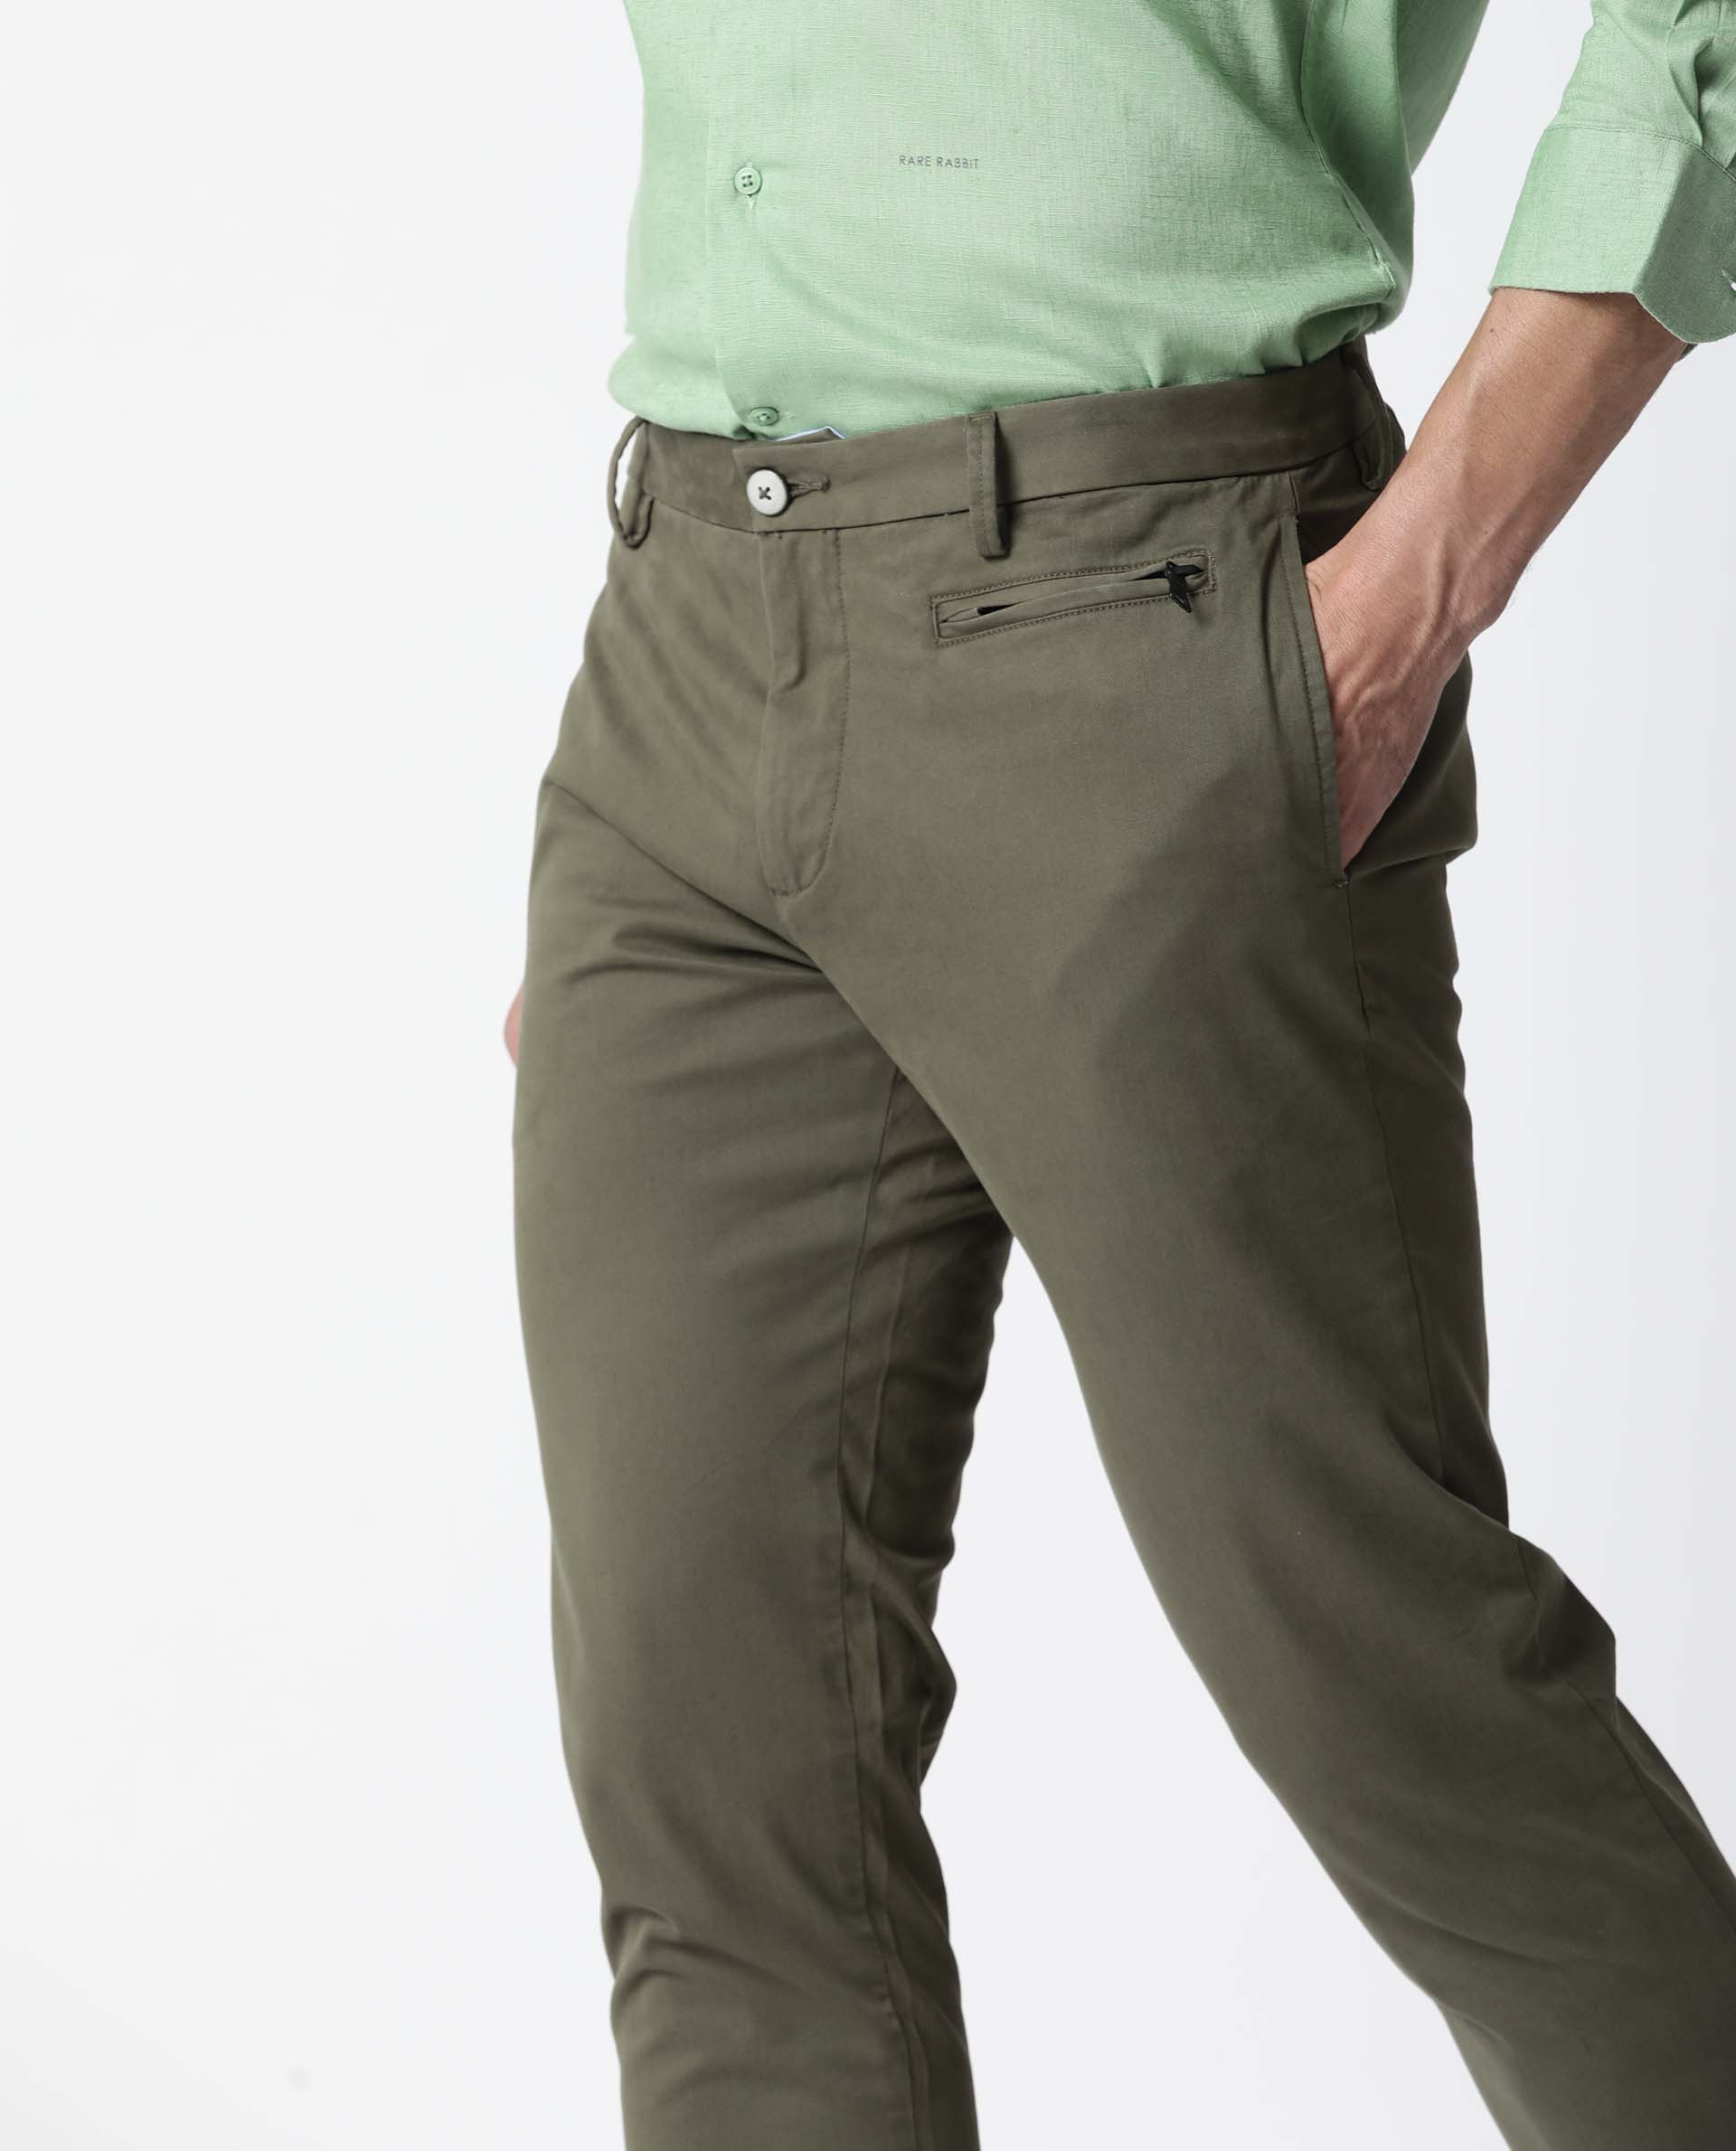 Buy Mens Trousers  How To Choose Pants Based On Style Fit  Fabric